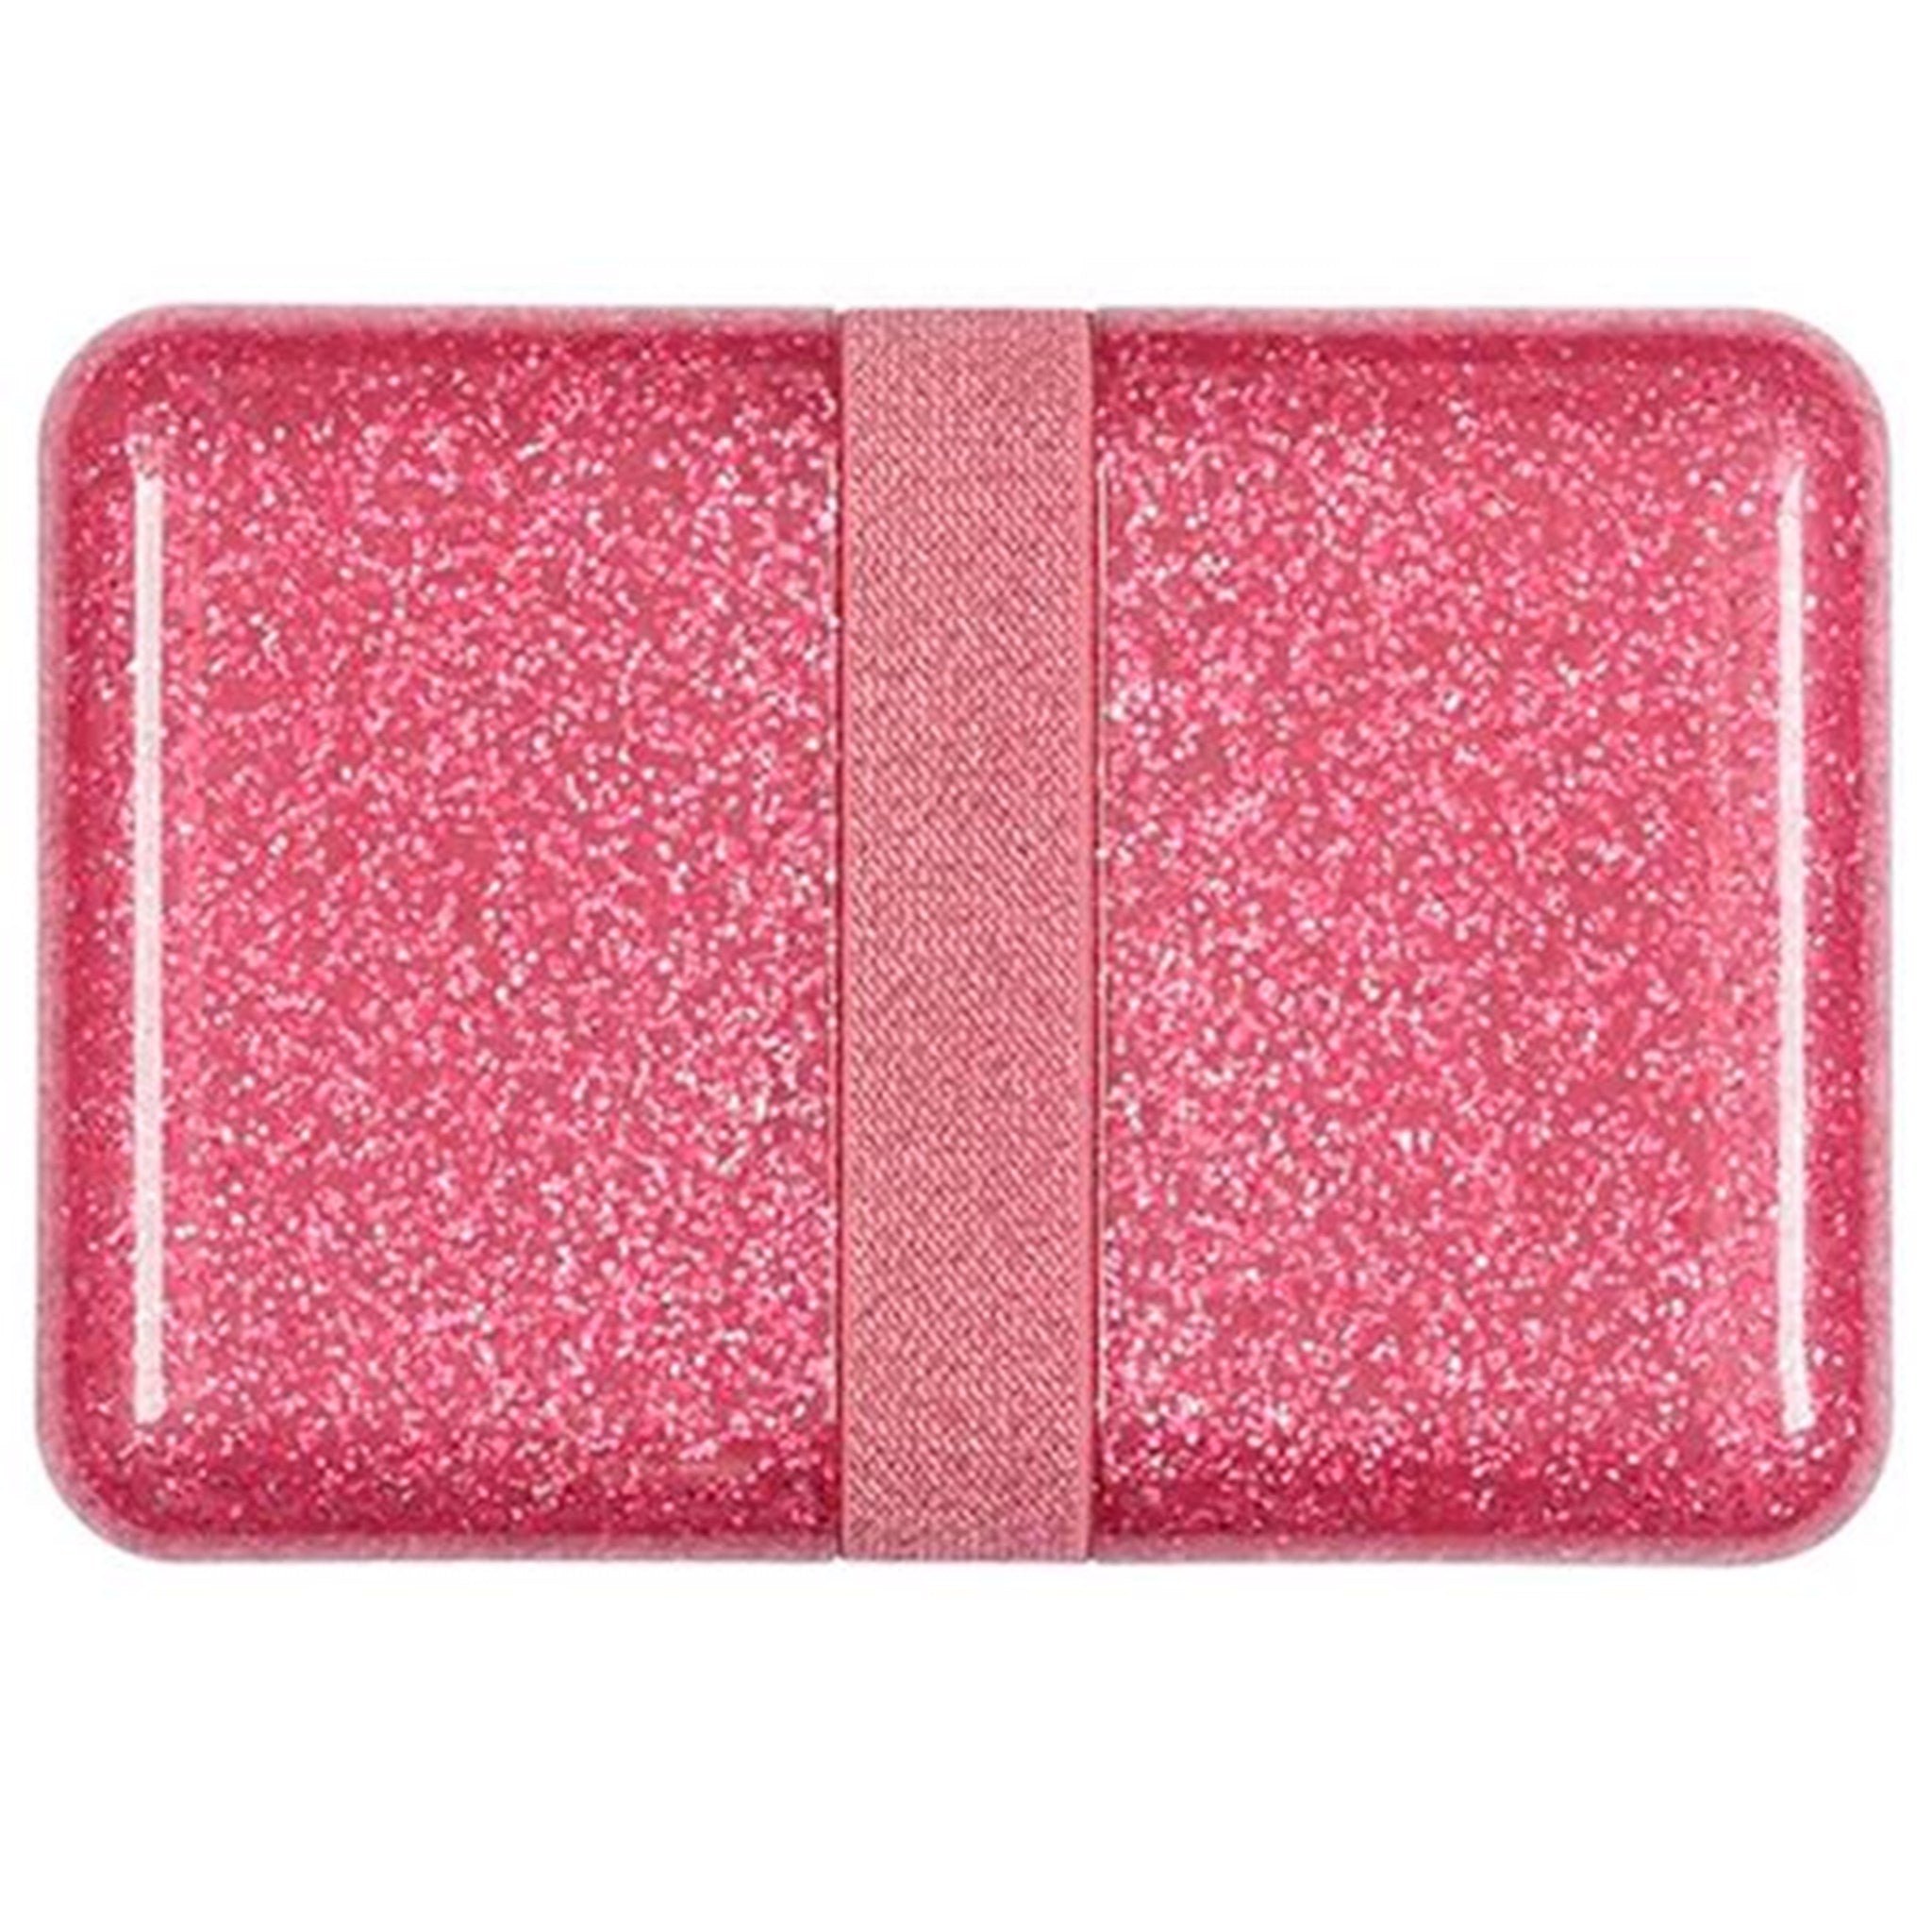 A Little Lovely Company Lunchbox Glitter Pink 3